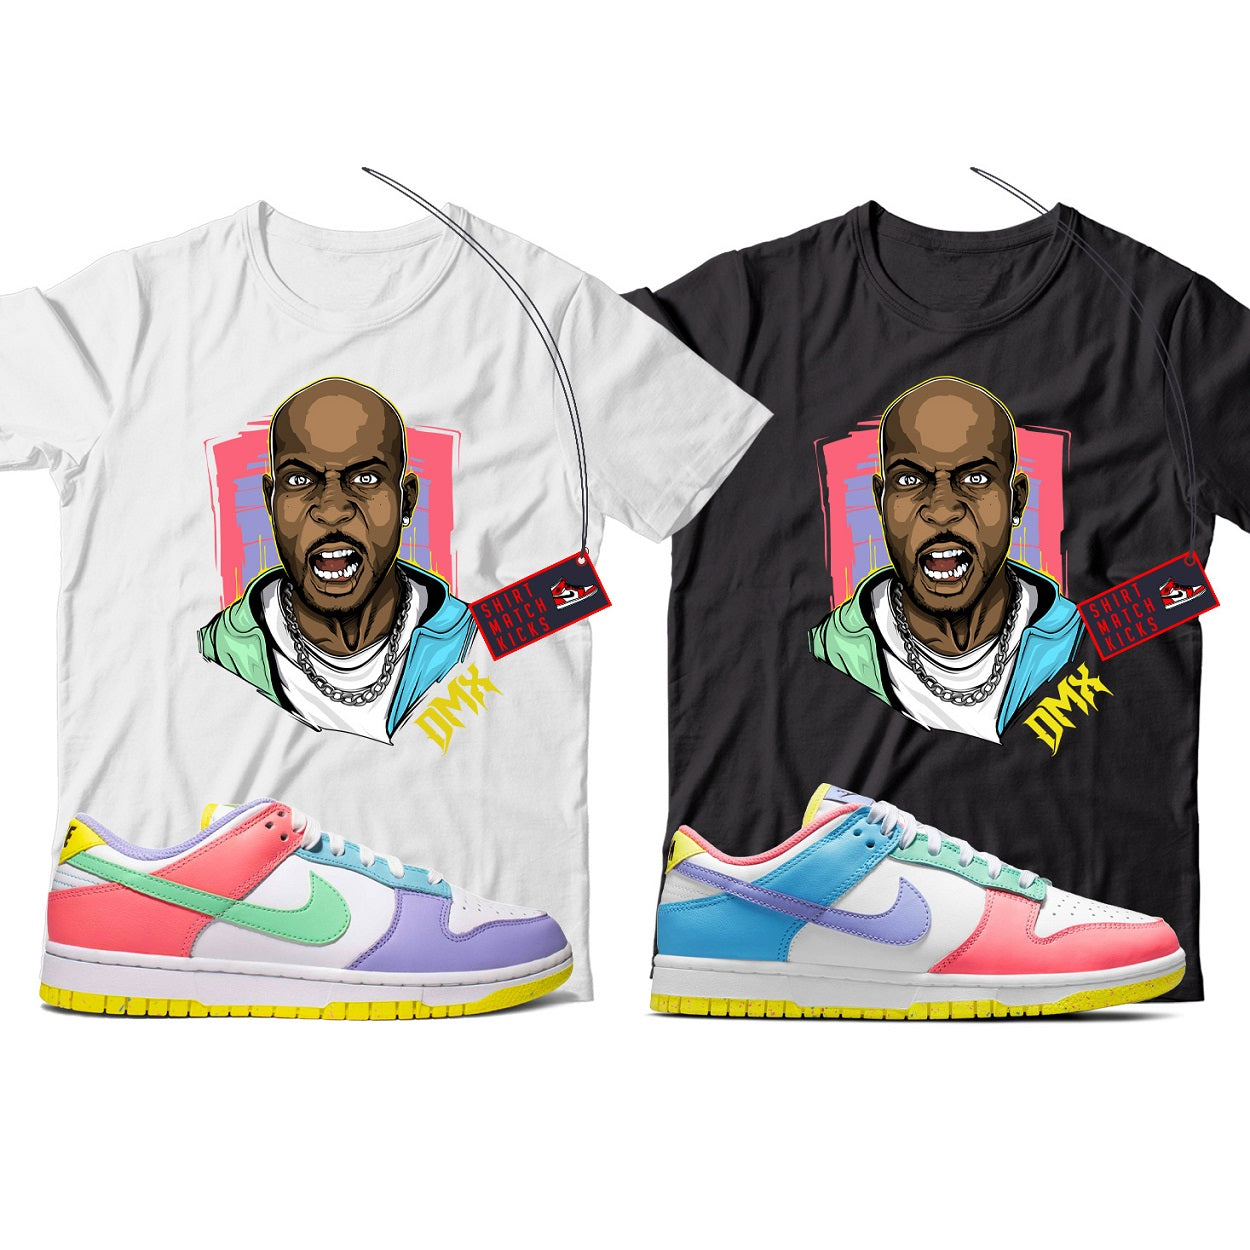 X T-Shirt Match Nike Dunk Low SE Easter Candy